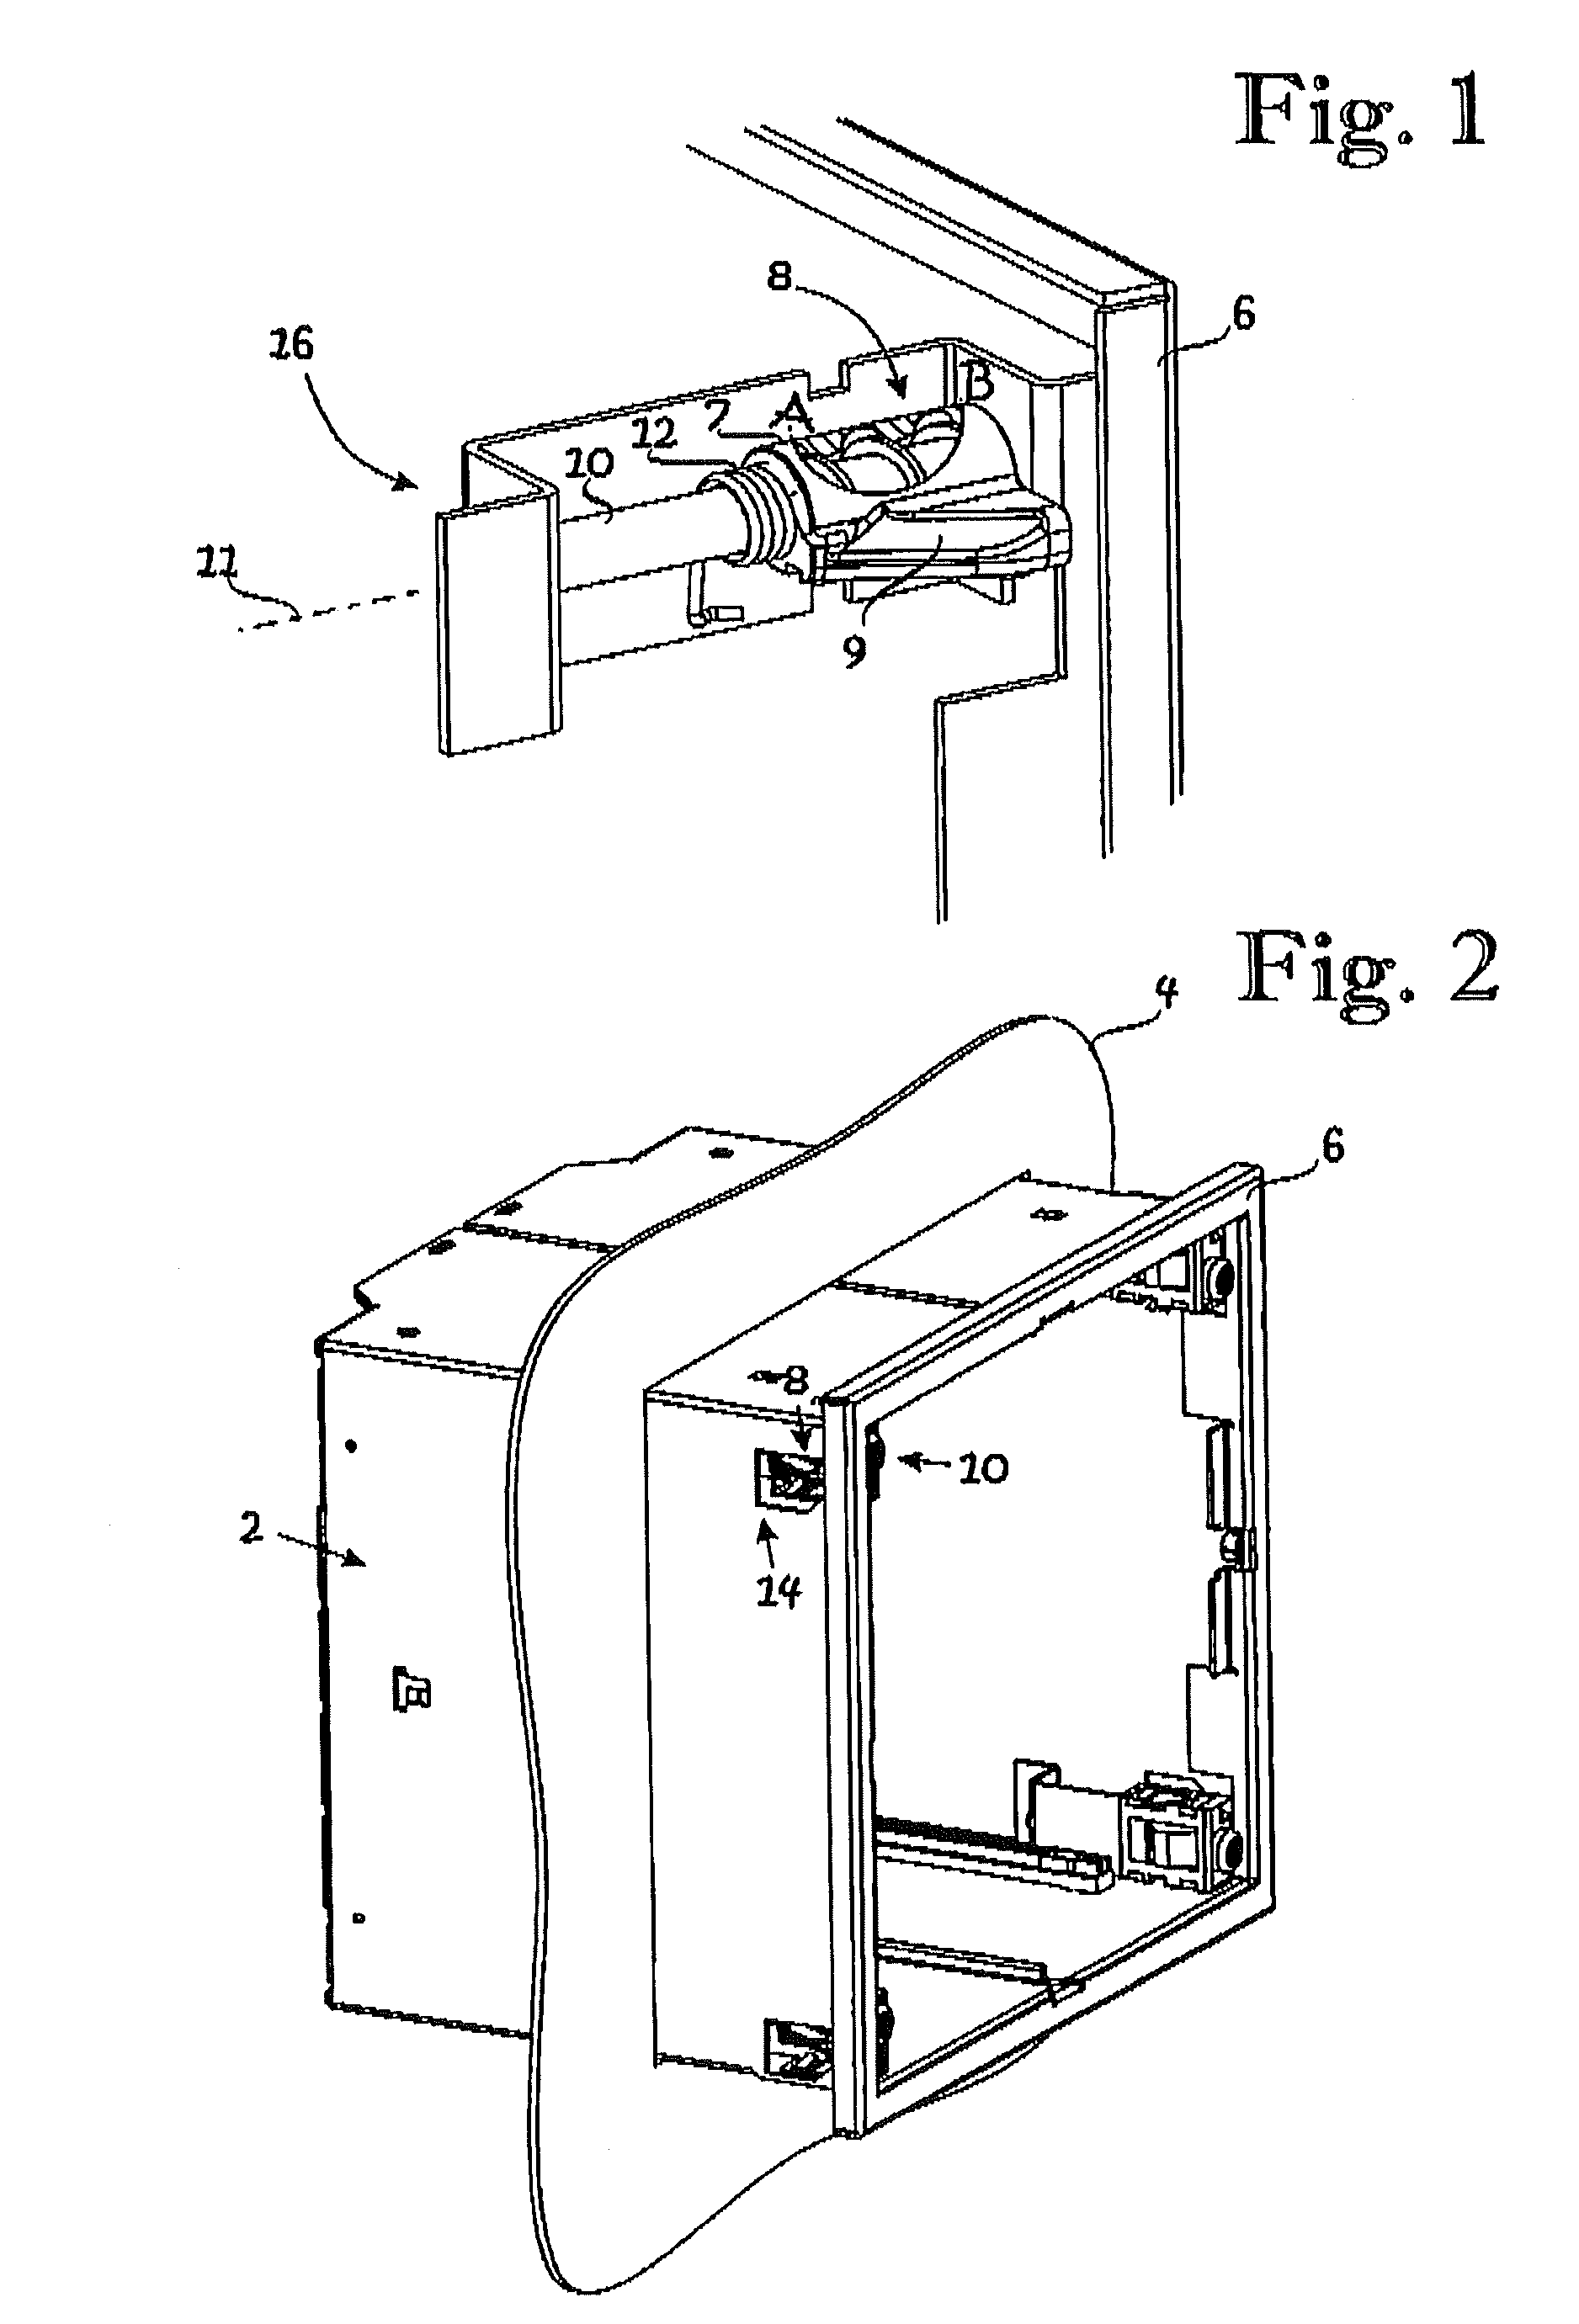 Mechanism for fastening casing into wall opening